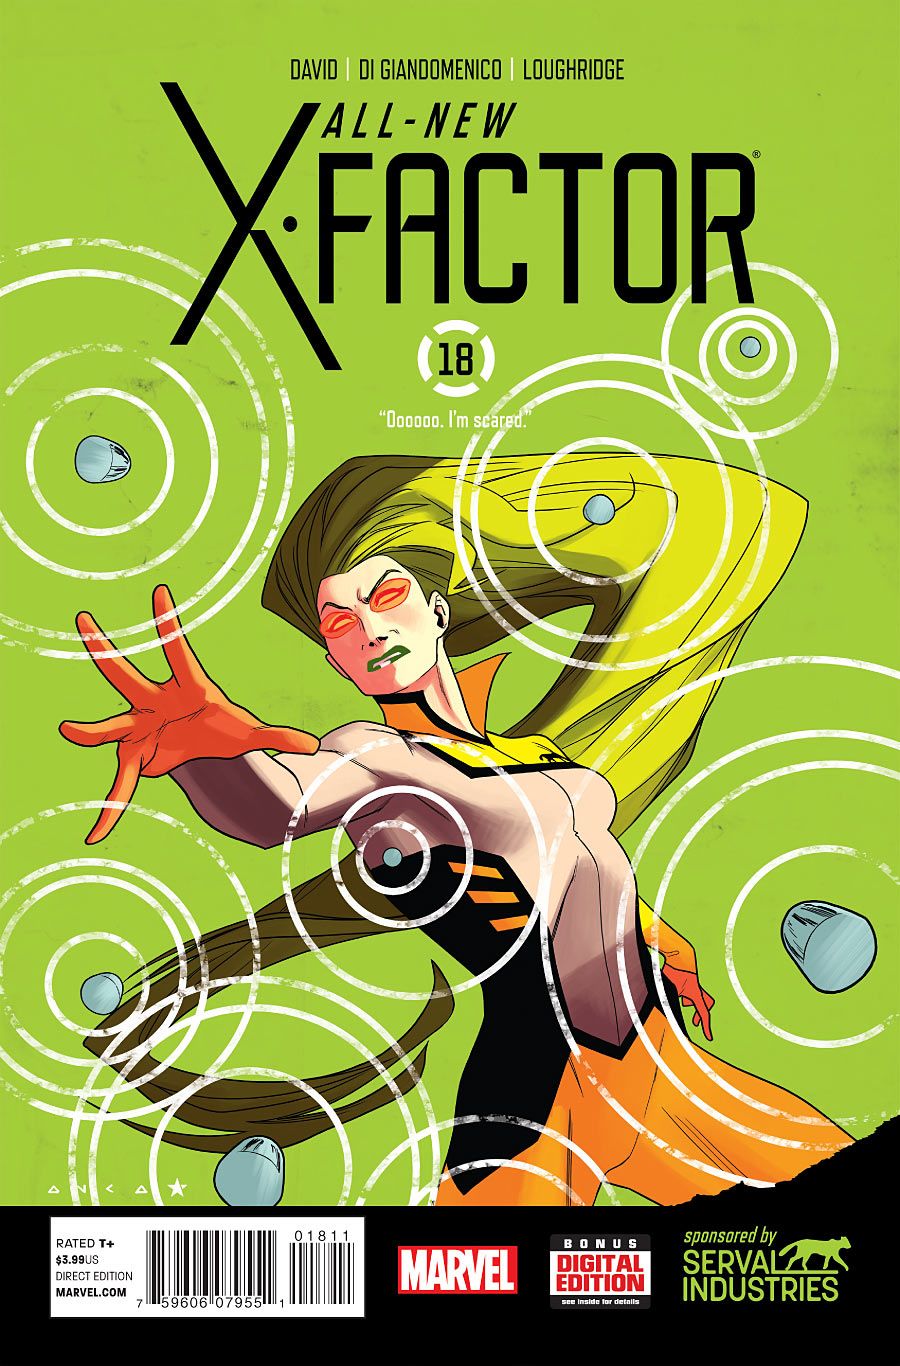 All New X-factor #18 Comic